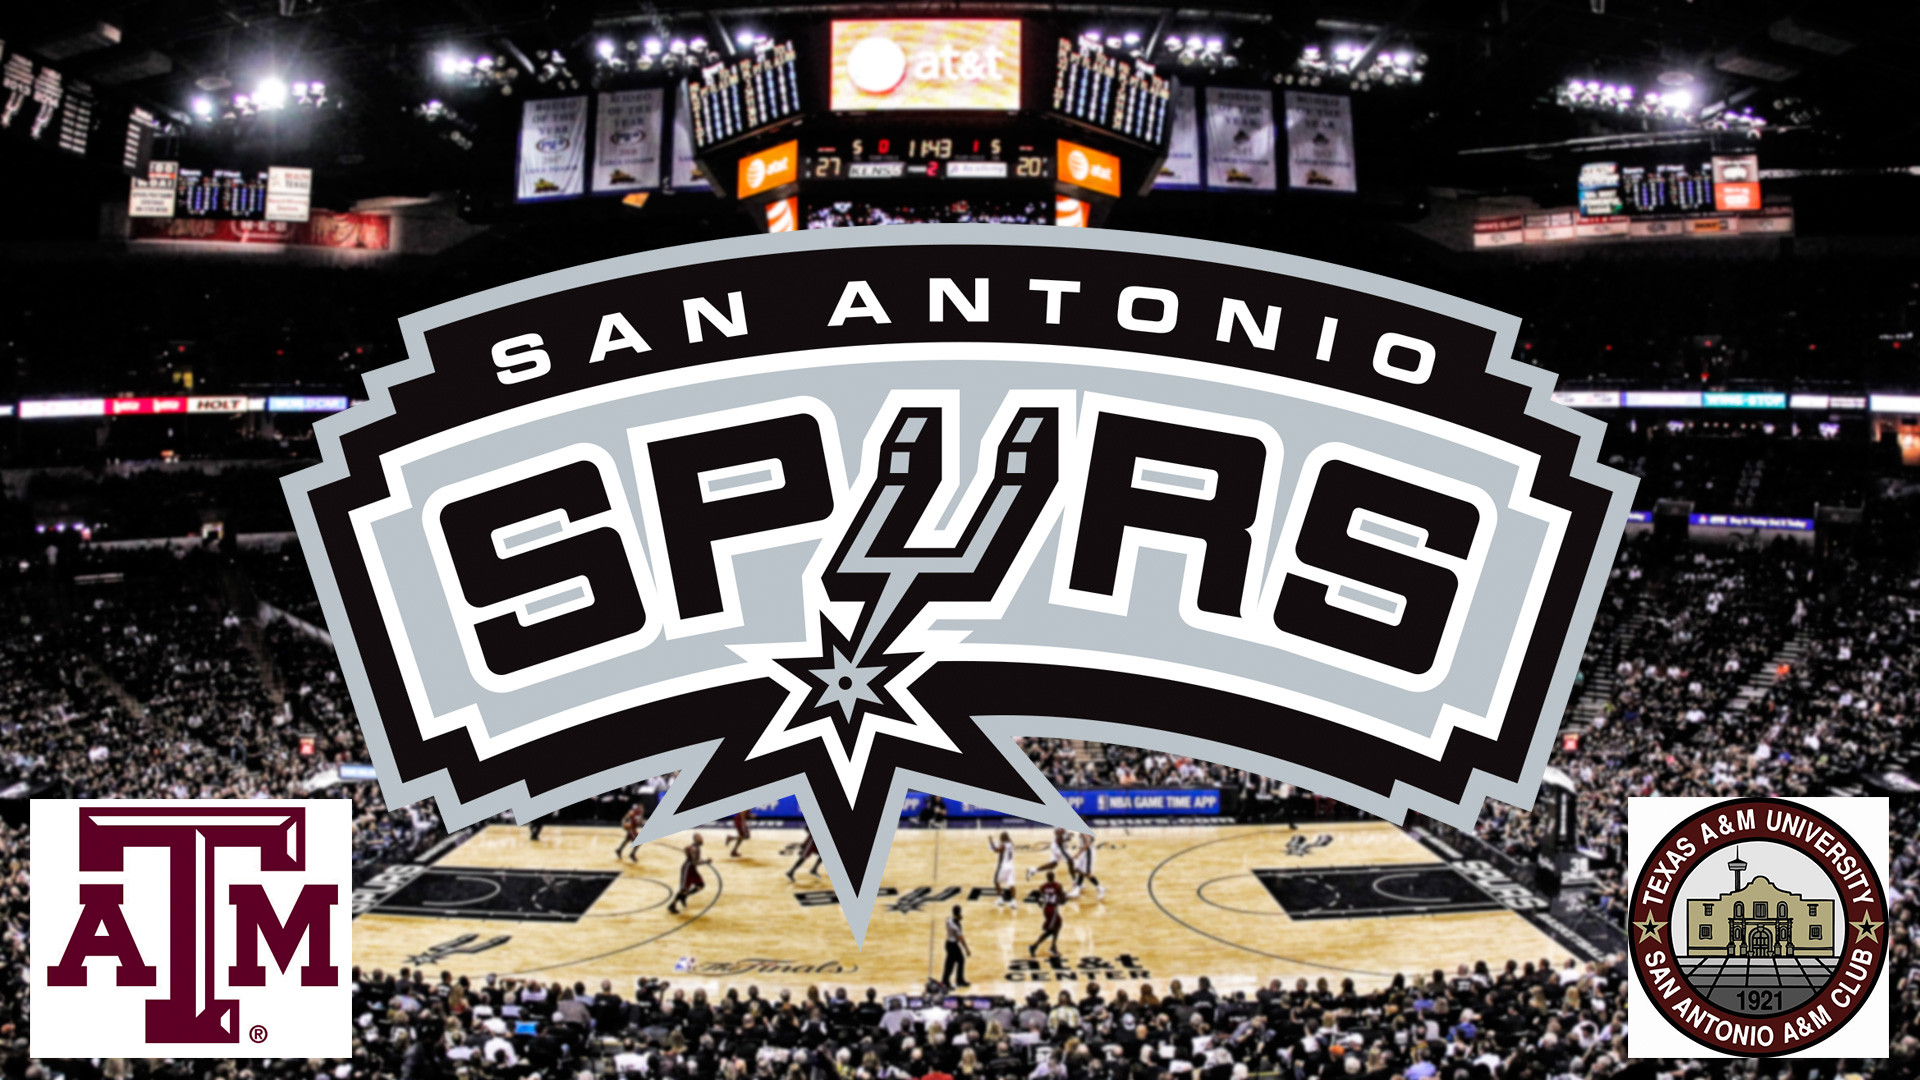 1920x1080 The San Antonio Spurs are hosting an official Aggie Night on Tuesday,  January 23rd, 2018 when the Spurs take on Lebron James and the Cleveland  Cavaliers!